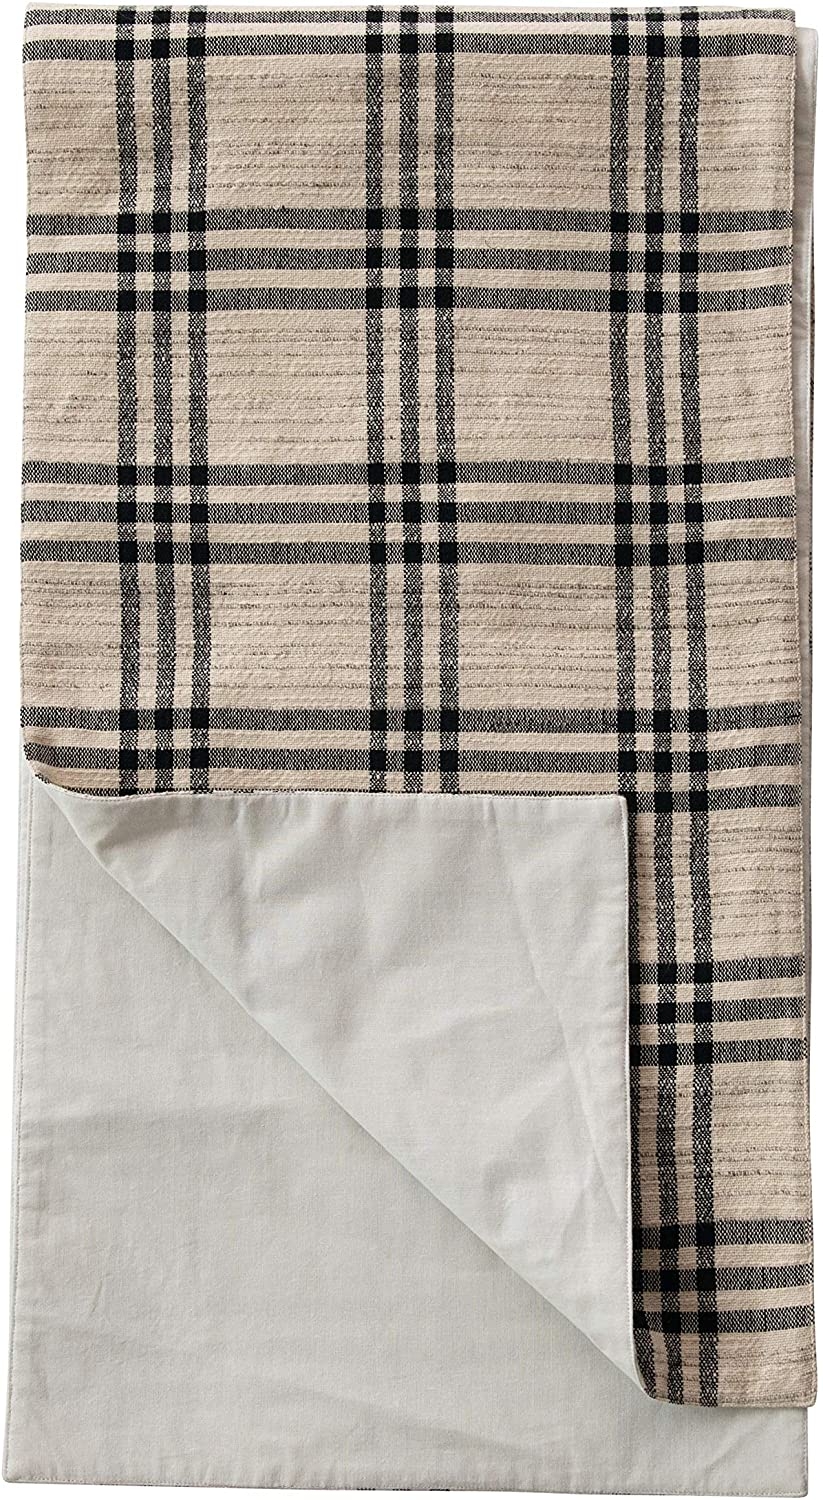 Black Plaid Woven Cotton and Wool Table Runner - Image 3